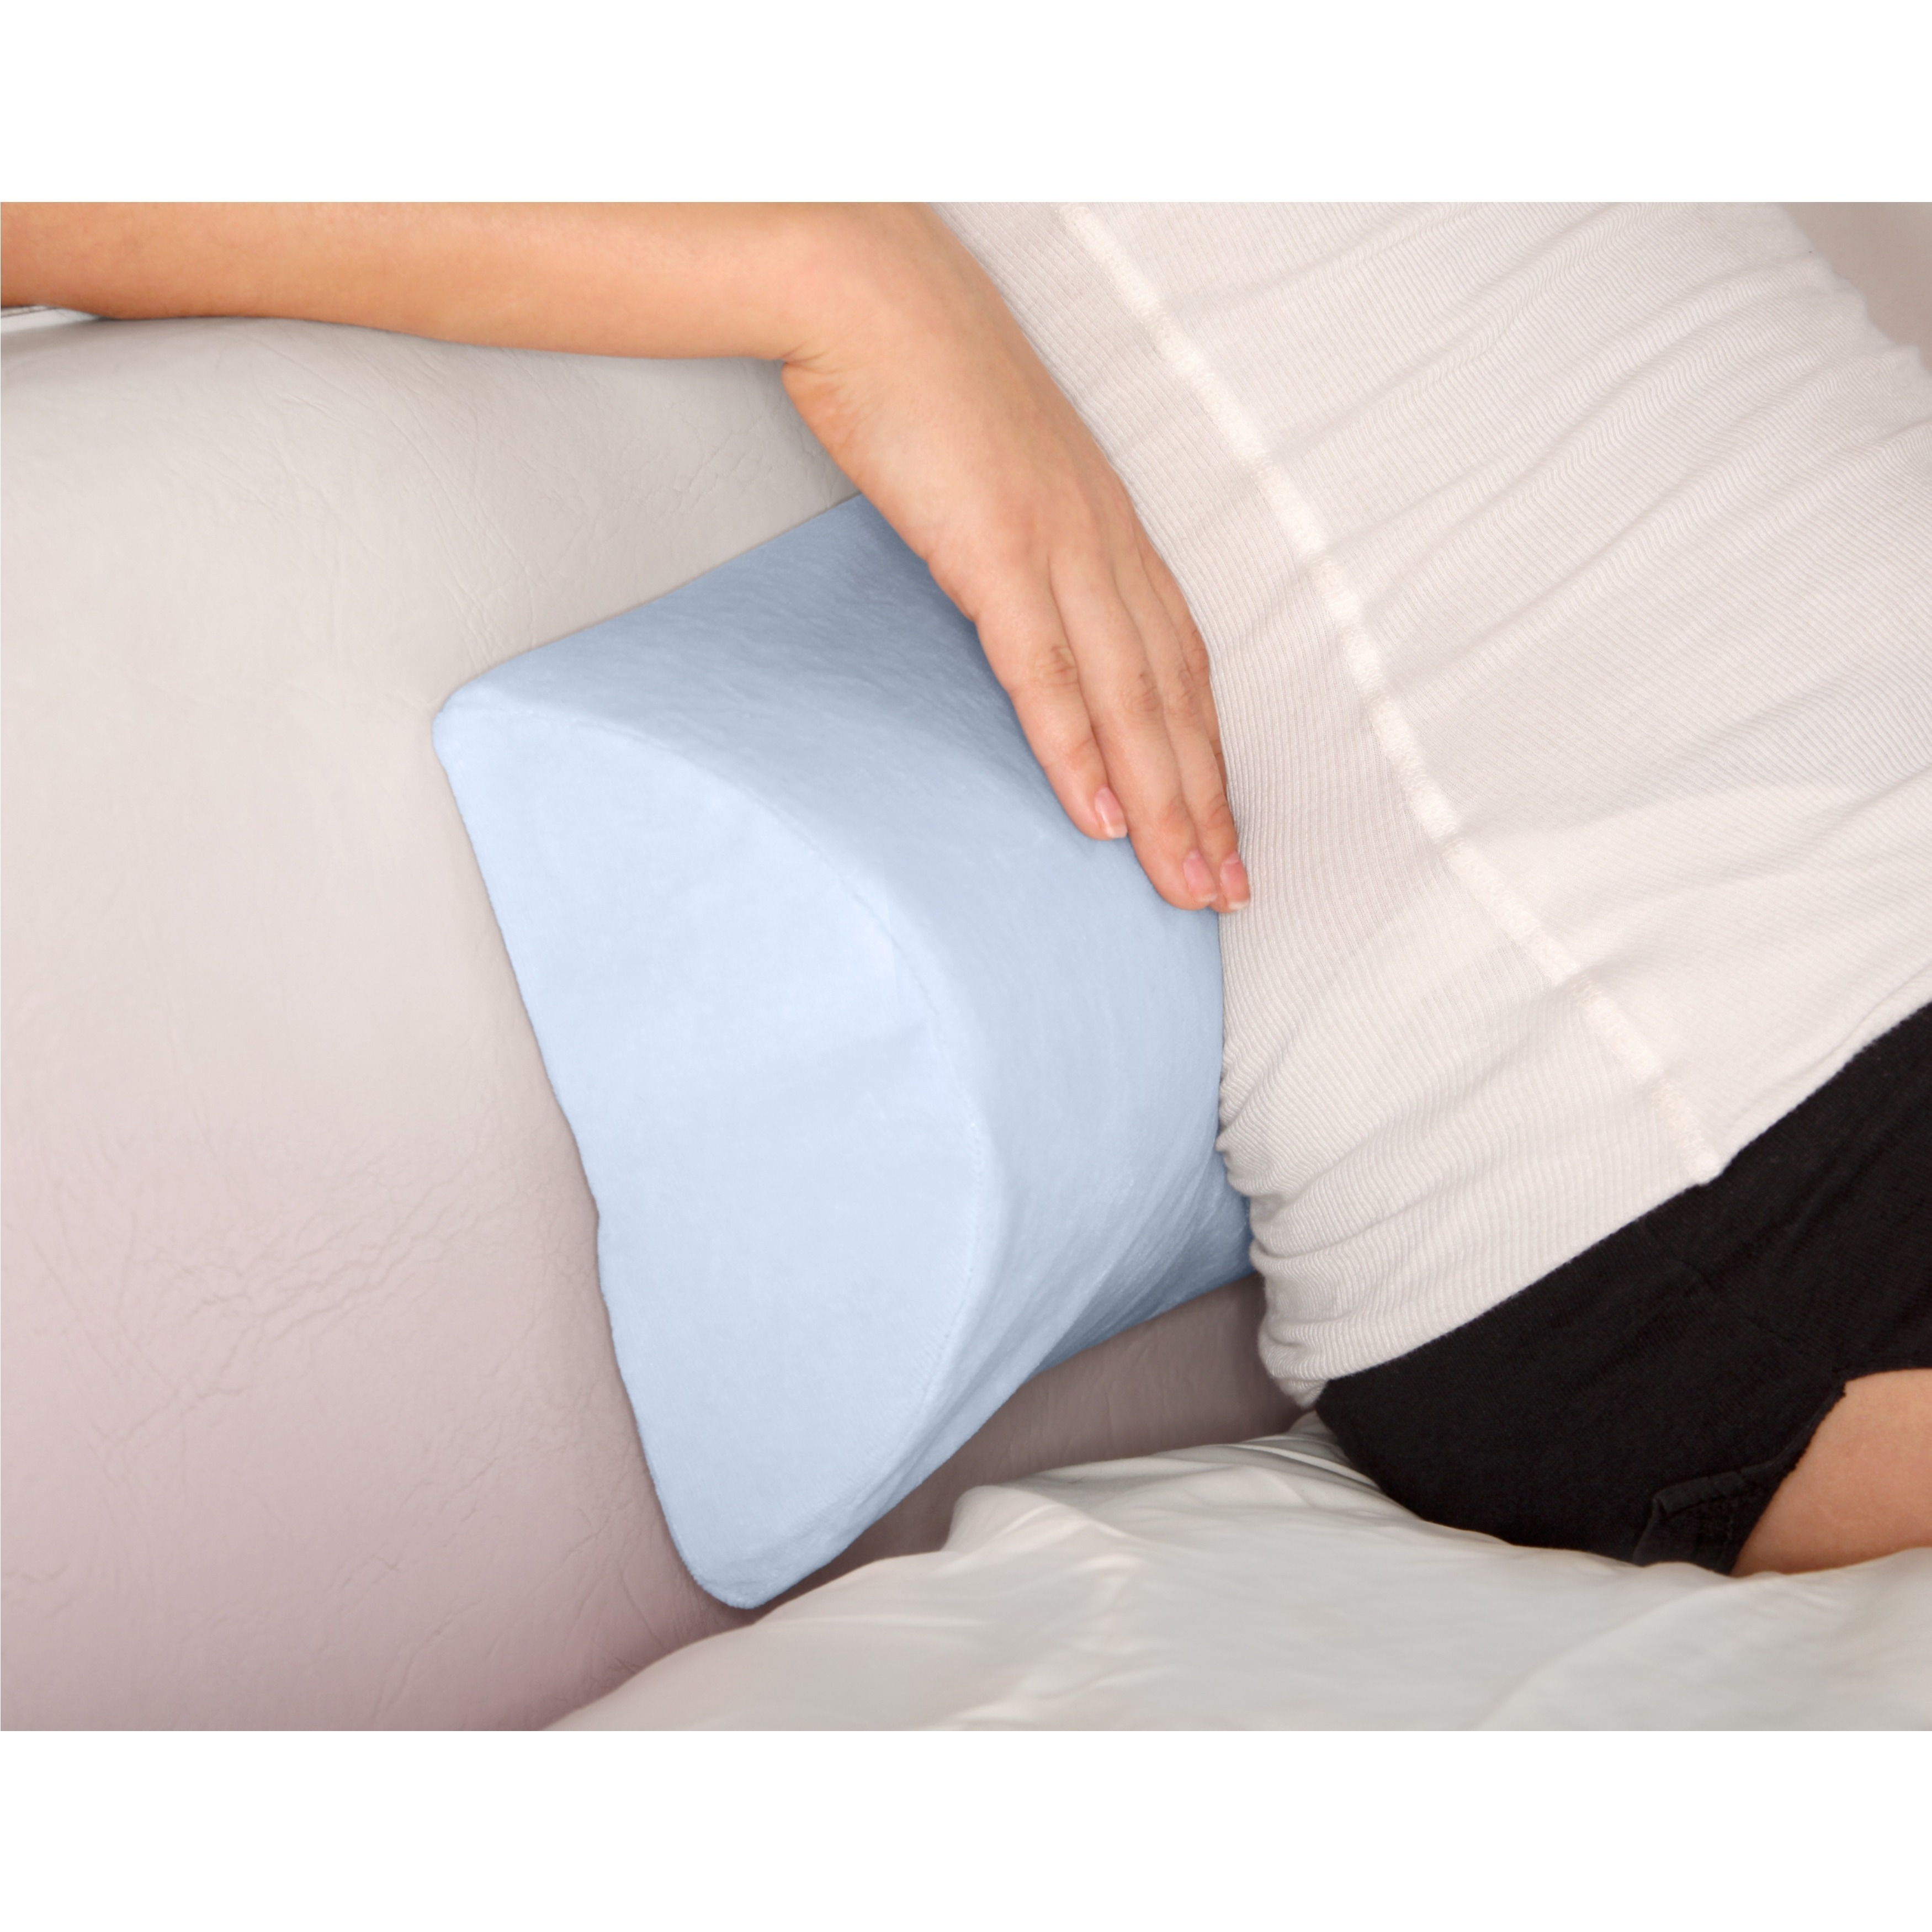 Half Moon / Cylinder Memory Foam Pillow - Back and Knee Pain Relief -  Memory Foam - Supportive Contour - Bed Pillow, Firm - Bed Bath & Beyond -  10325025